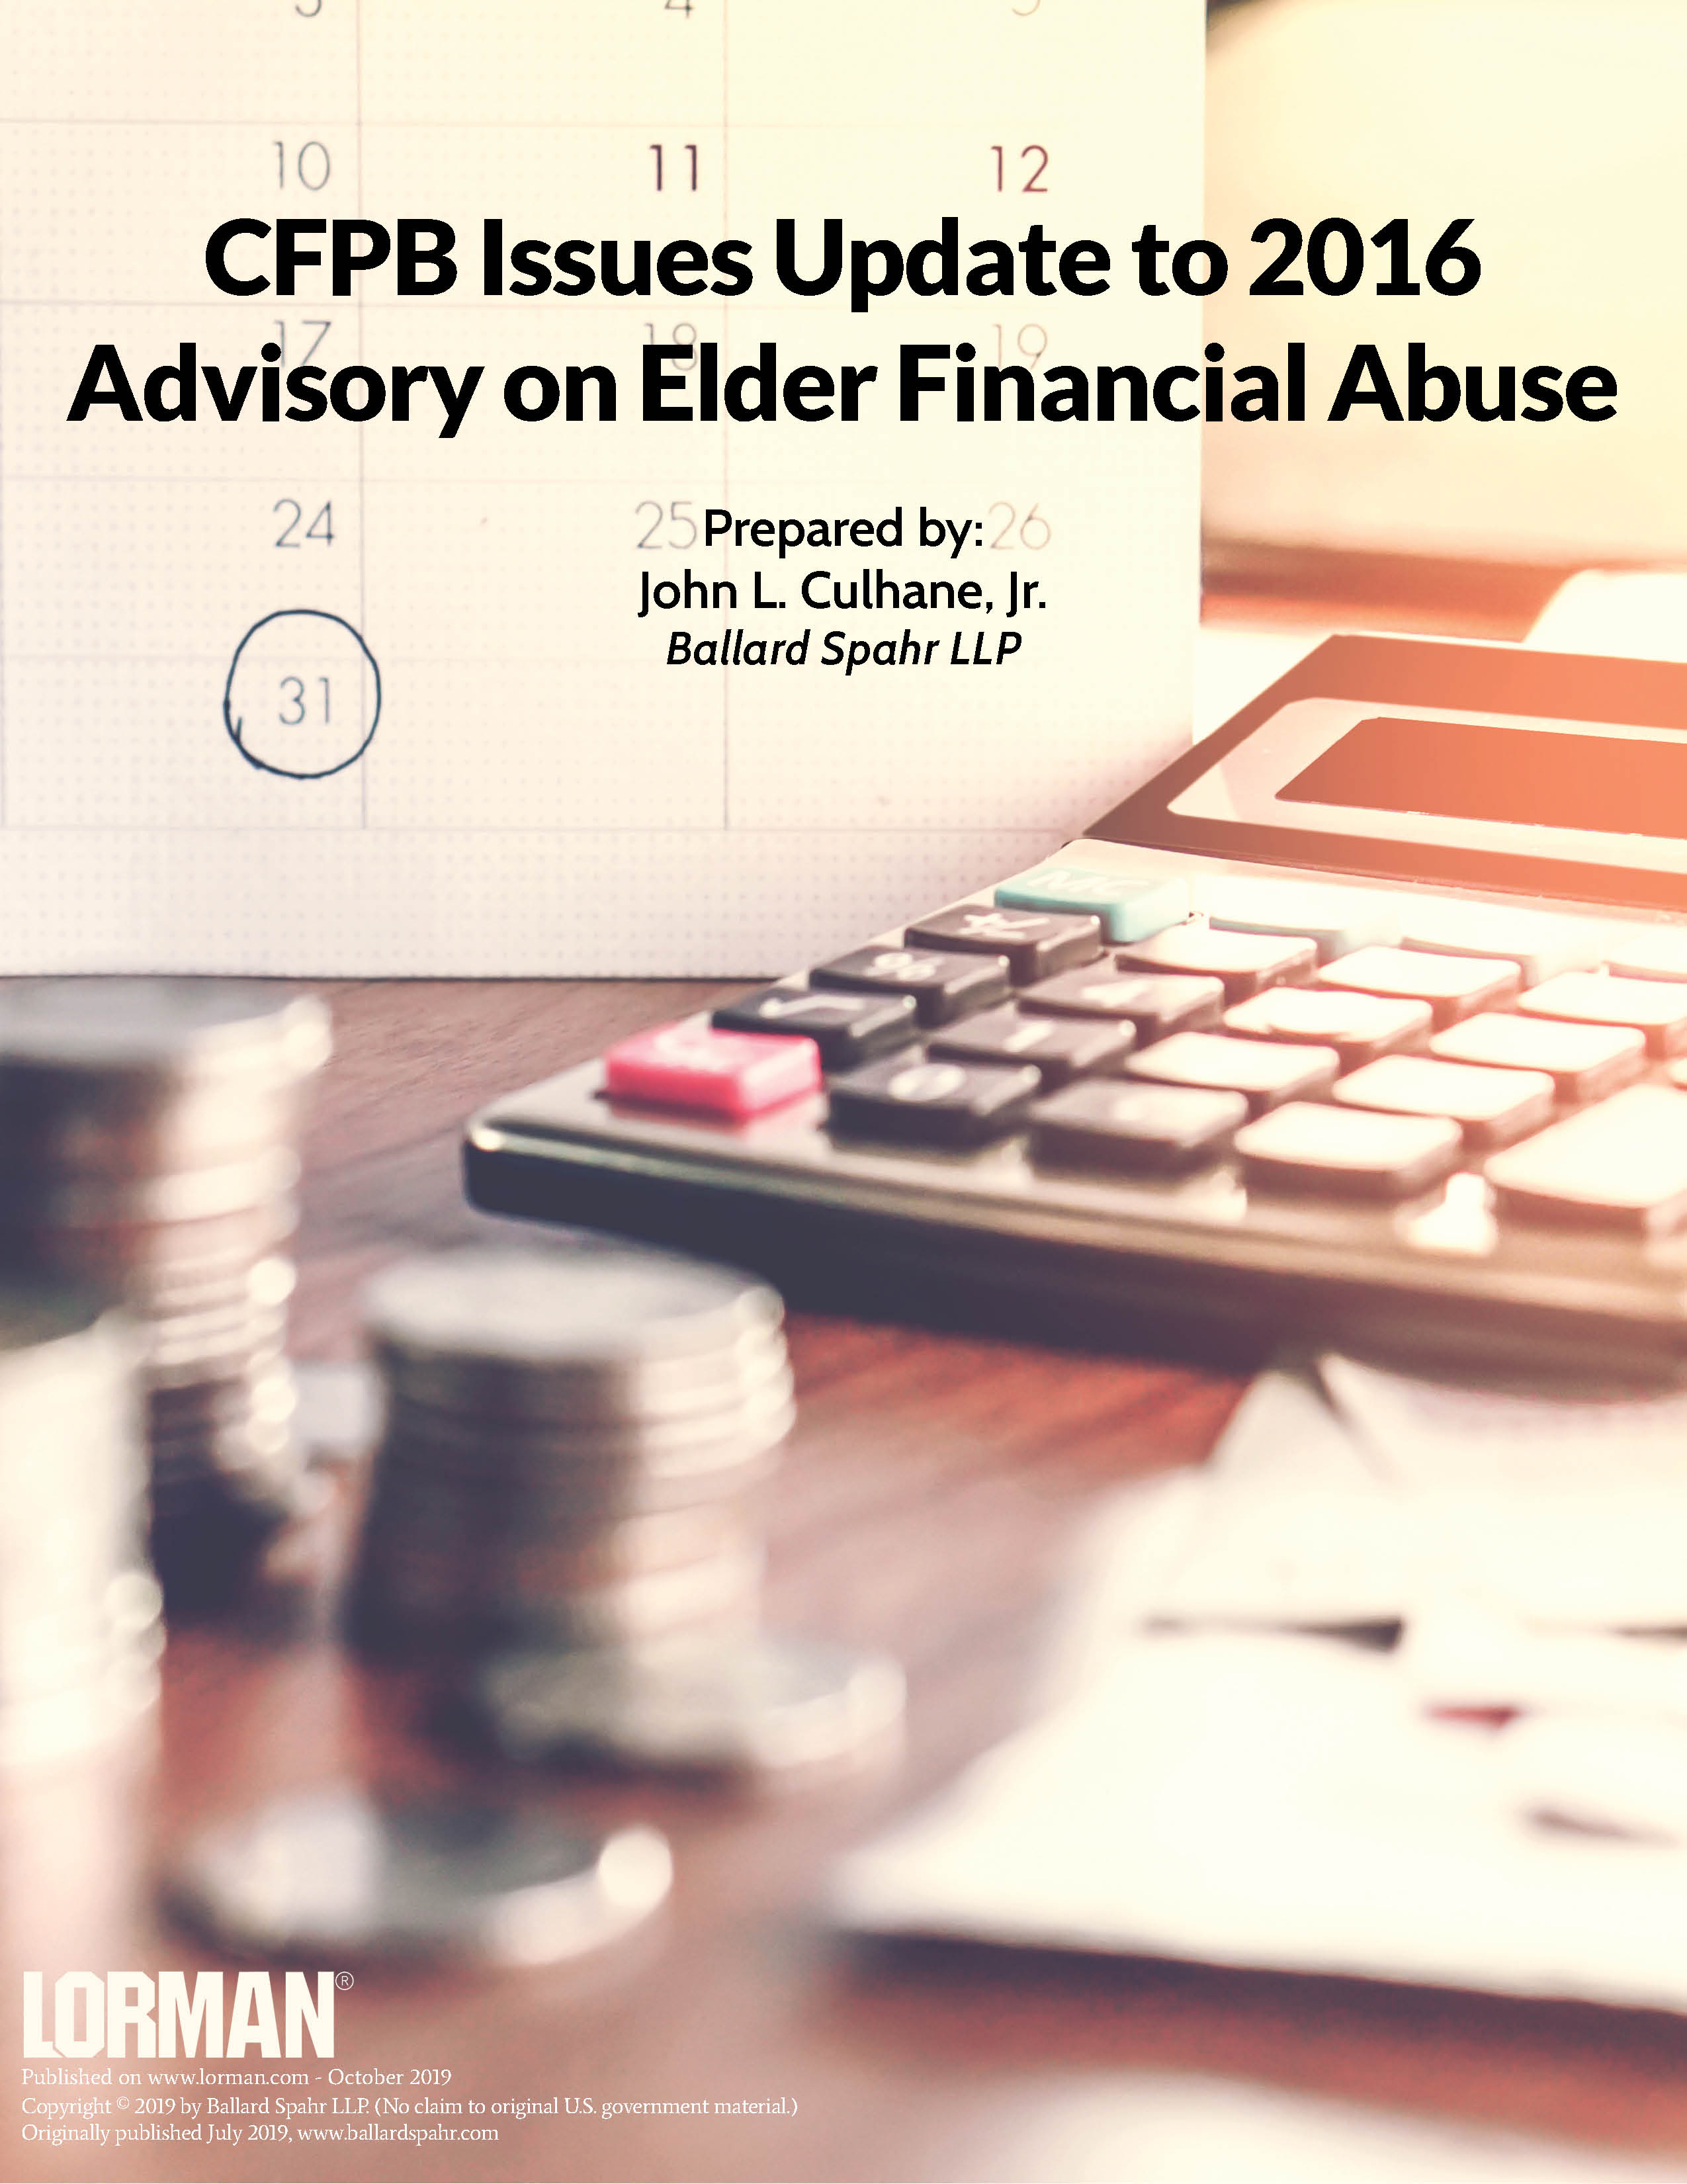 CFPB Issues Update to 2016 Advisory on Elder Financial Abuse